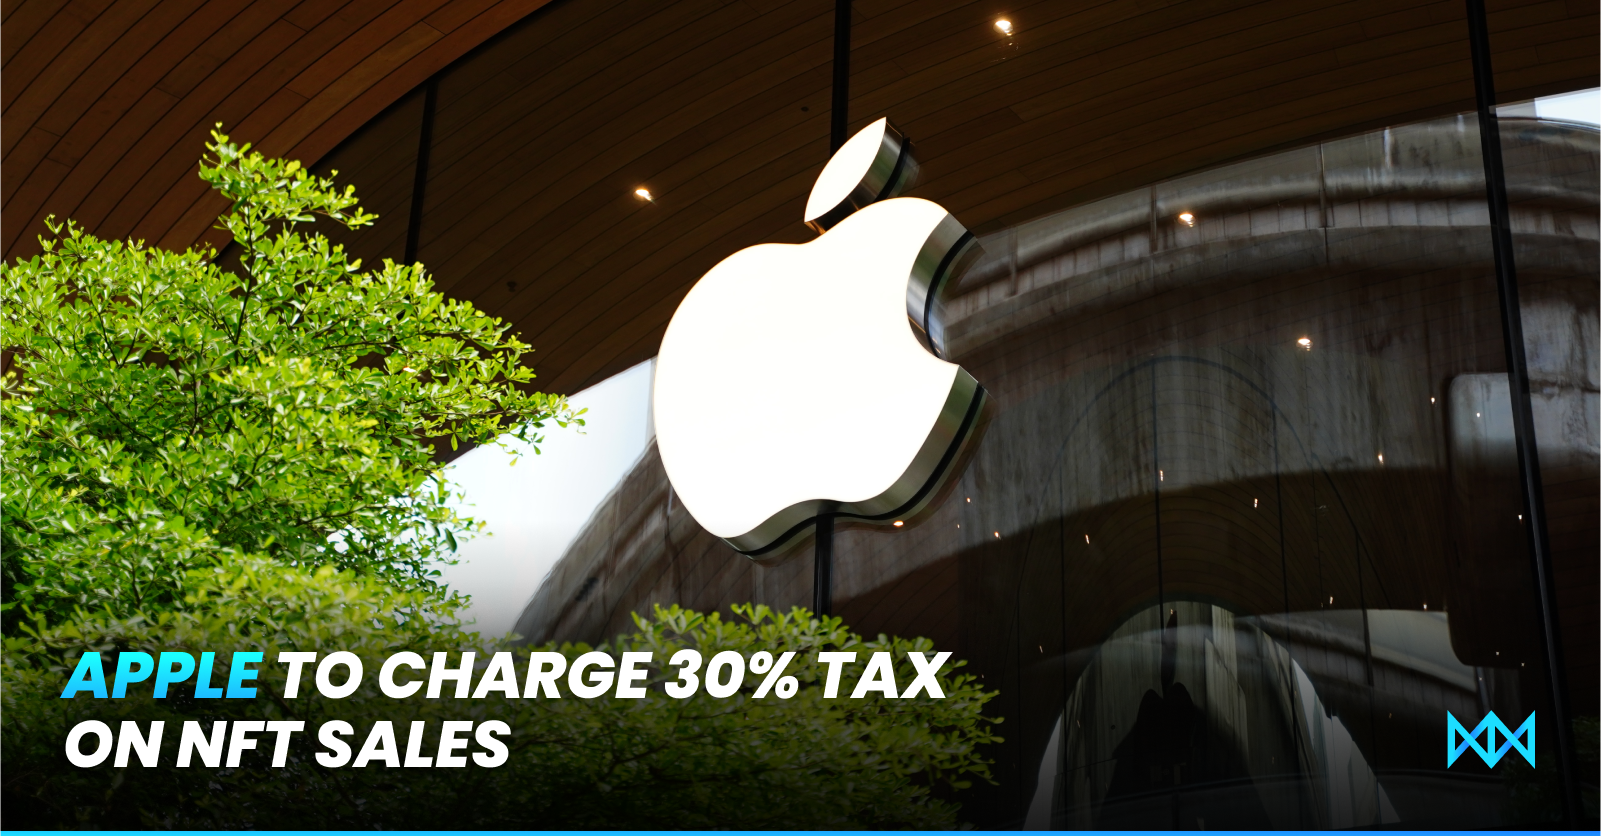 Apple Has Allowed NFT Sales On its App Store with 30% Tax